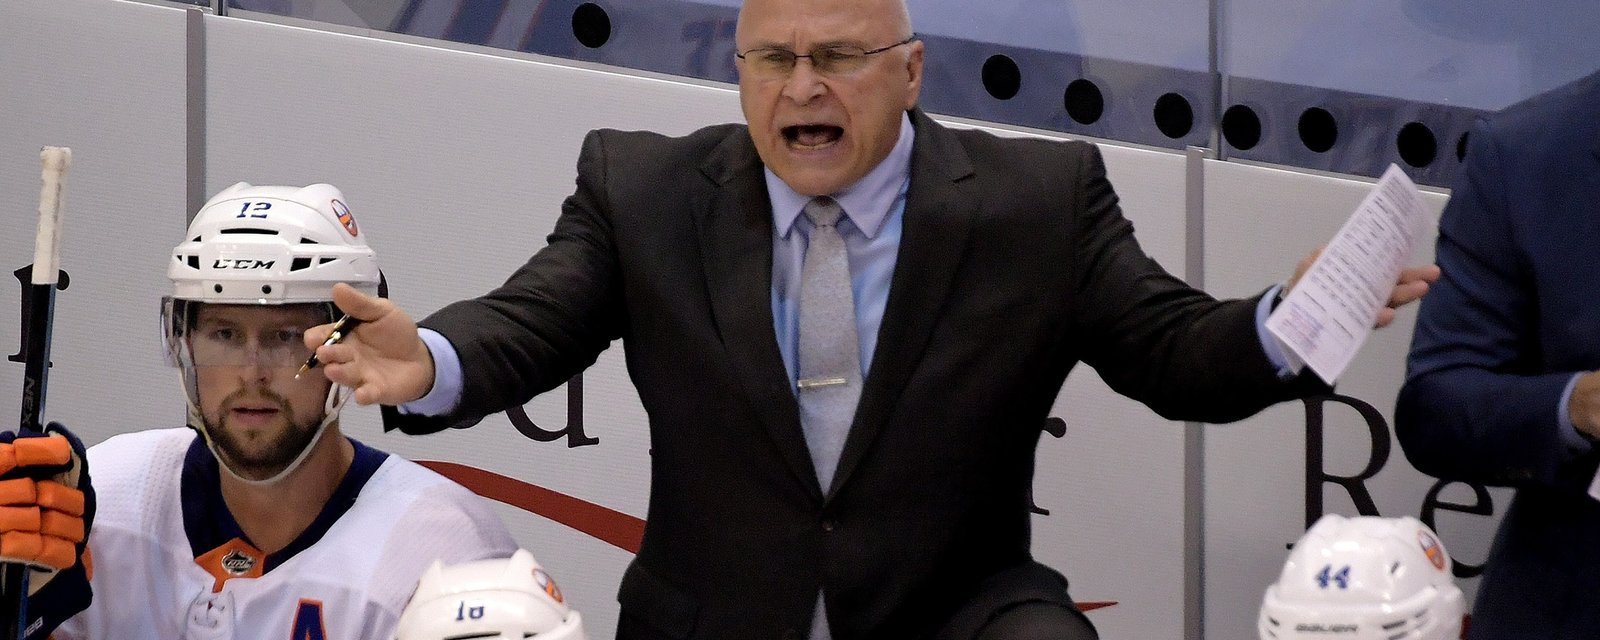 “Real reason” was Barry Trotz was fired by Islanders emerges